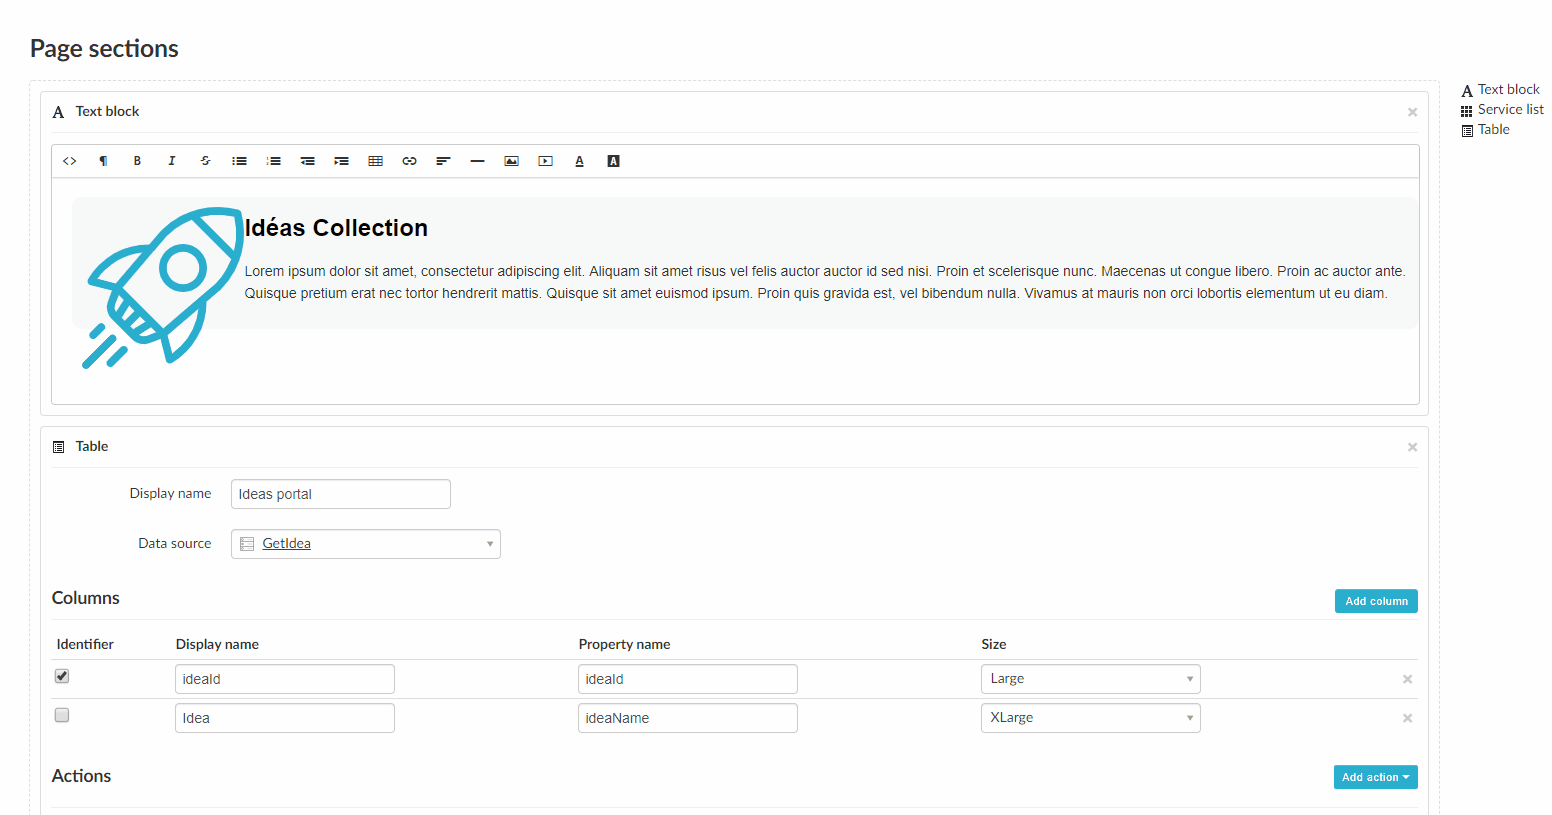 Customize table and add actions to page